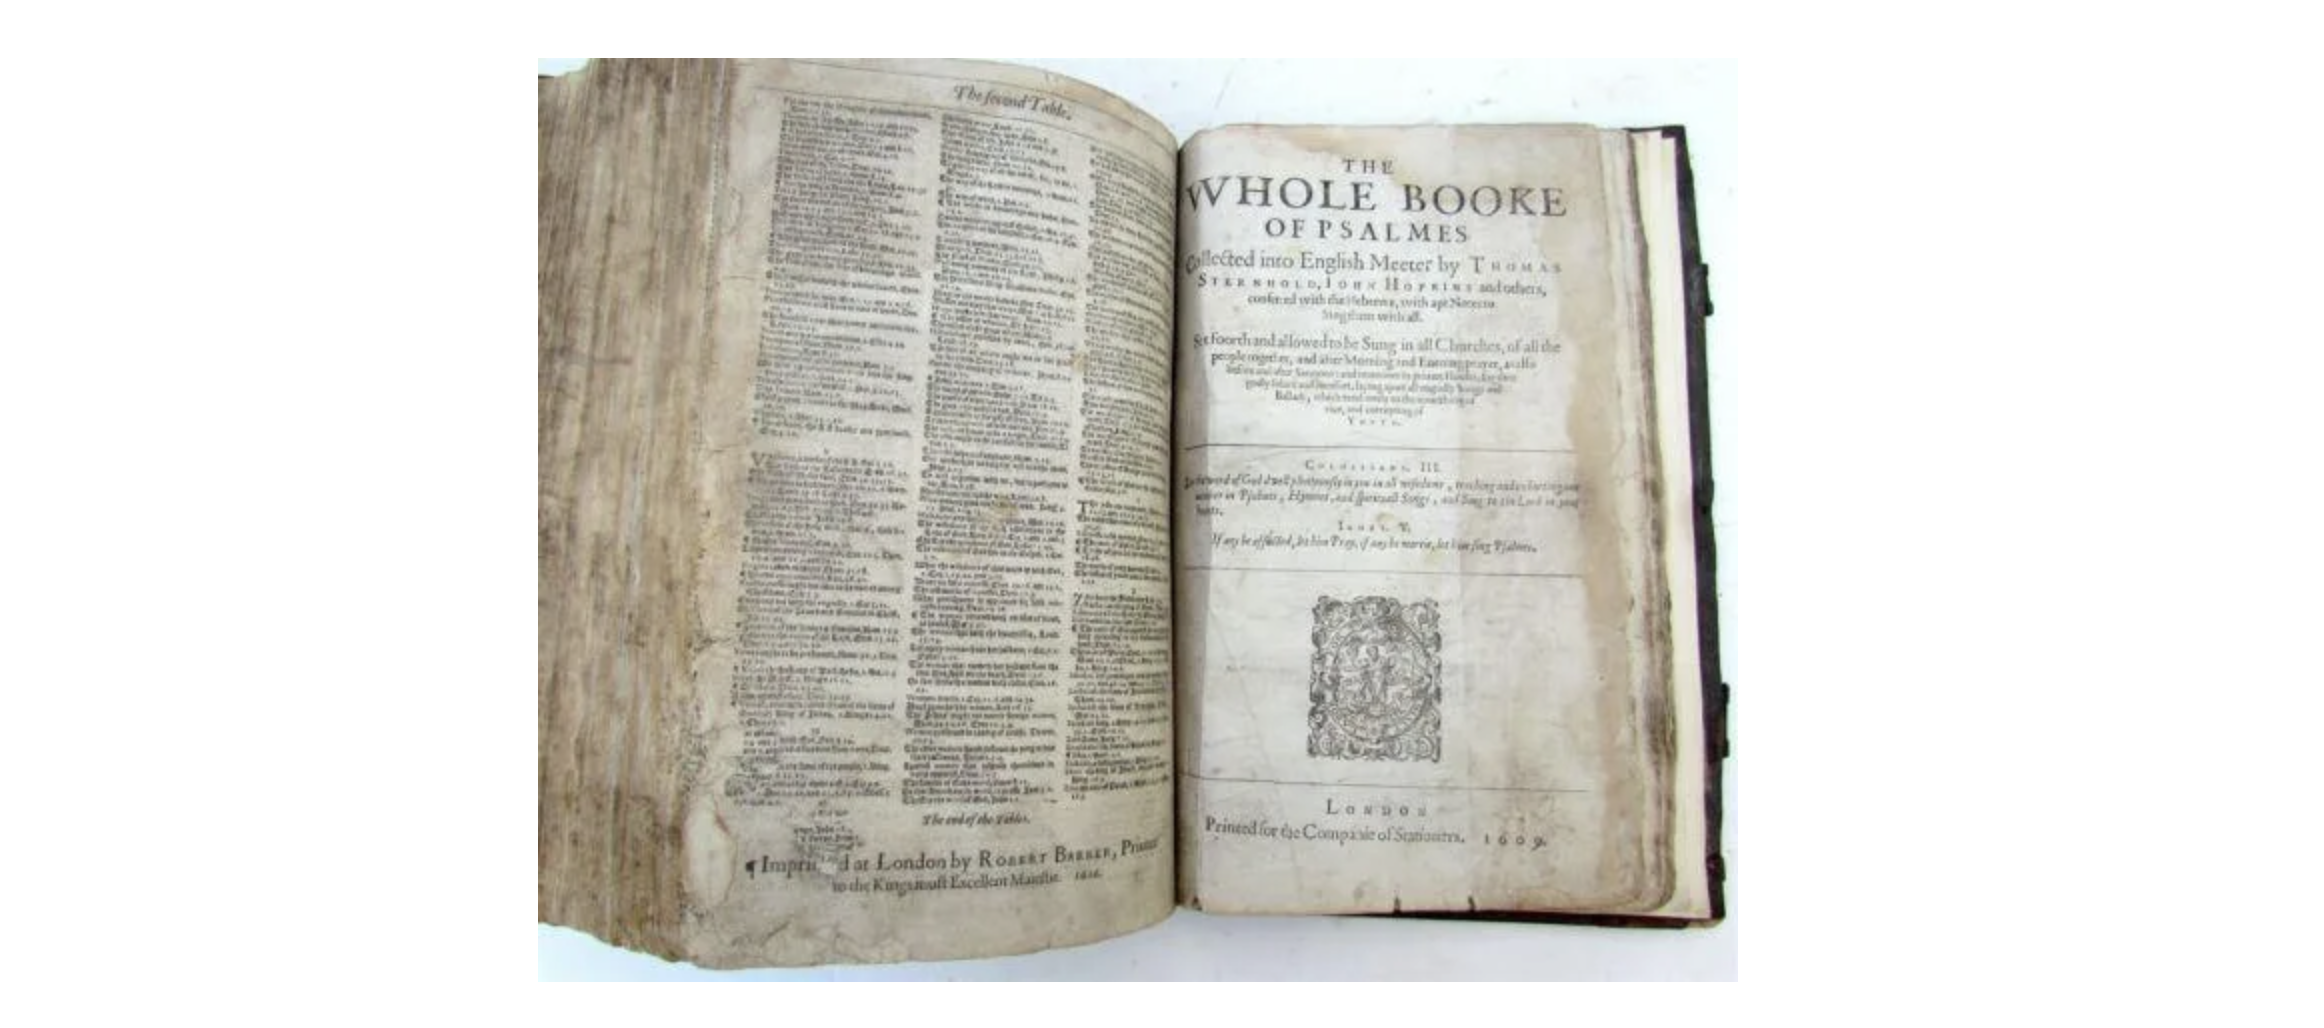 1609 copy of The Whole Booke of Psalms, bound into a 1616 copy of the Geneva version of the Bible, together est. $3,500-$4,000